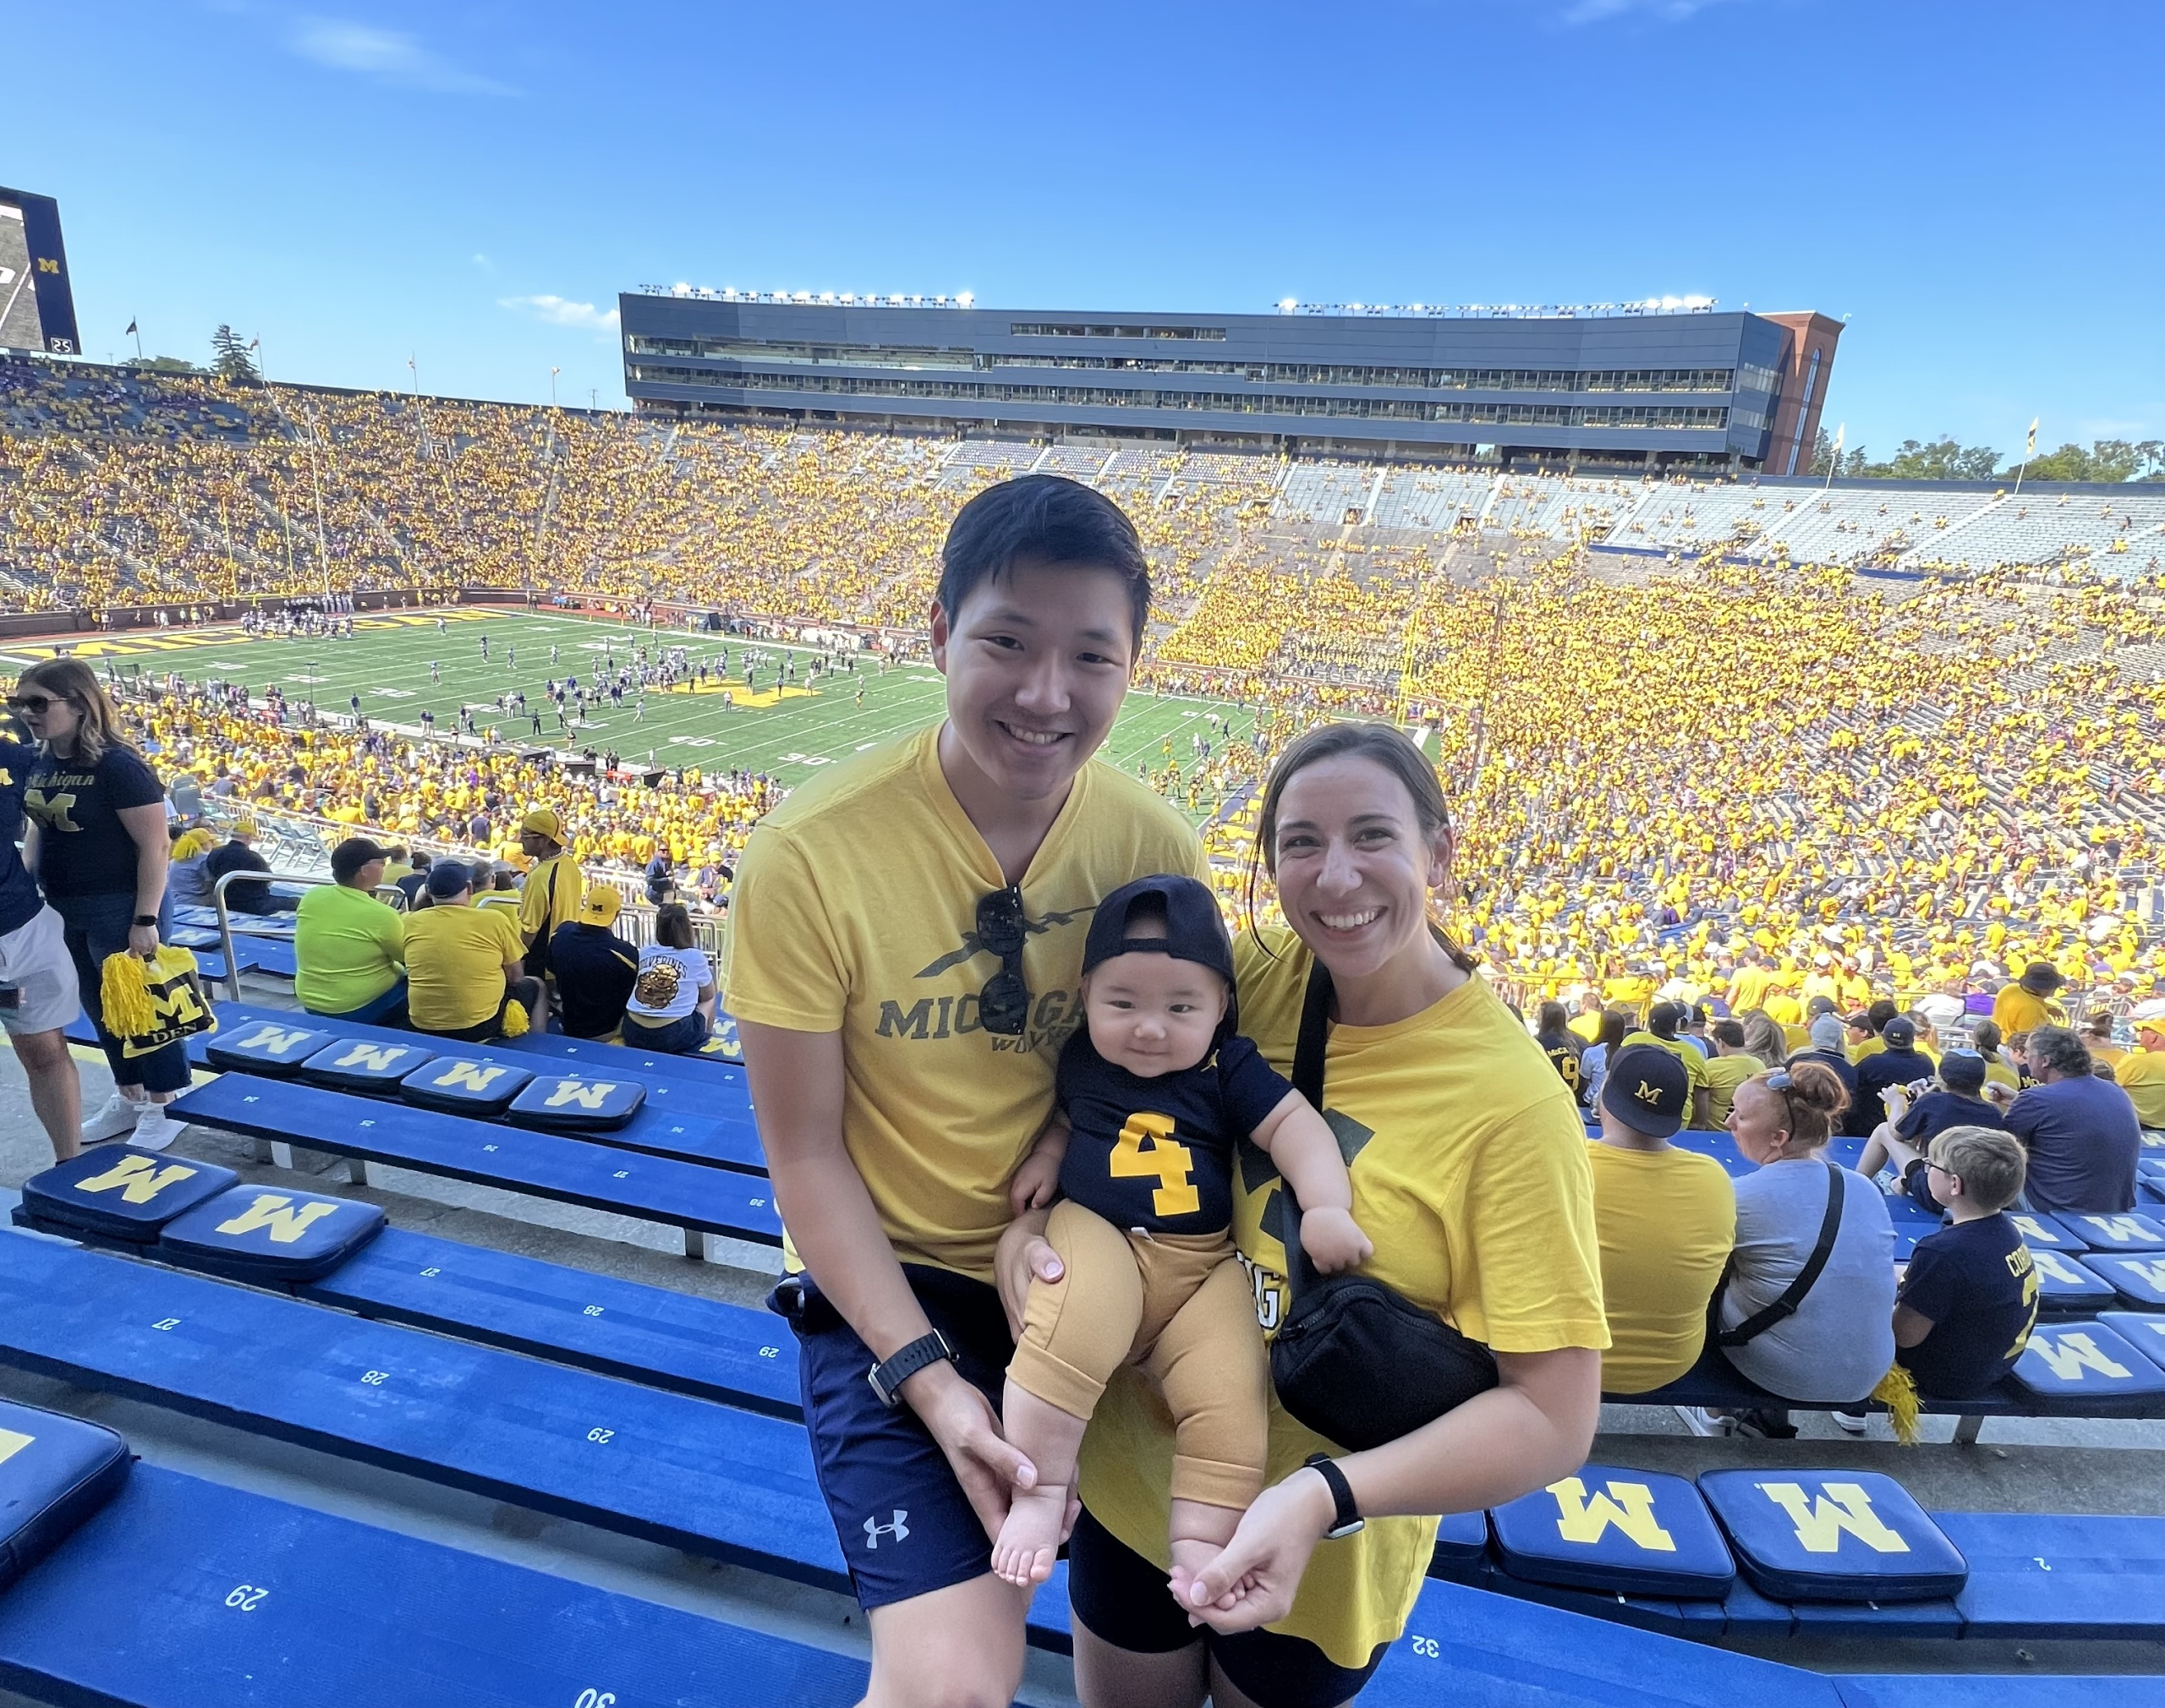 The Byler family poses for a photo in the stands at the University of Michigan football stadium.